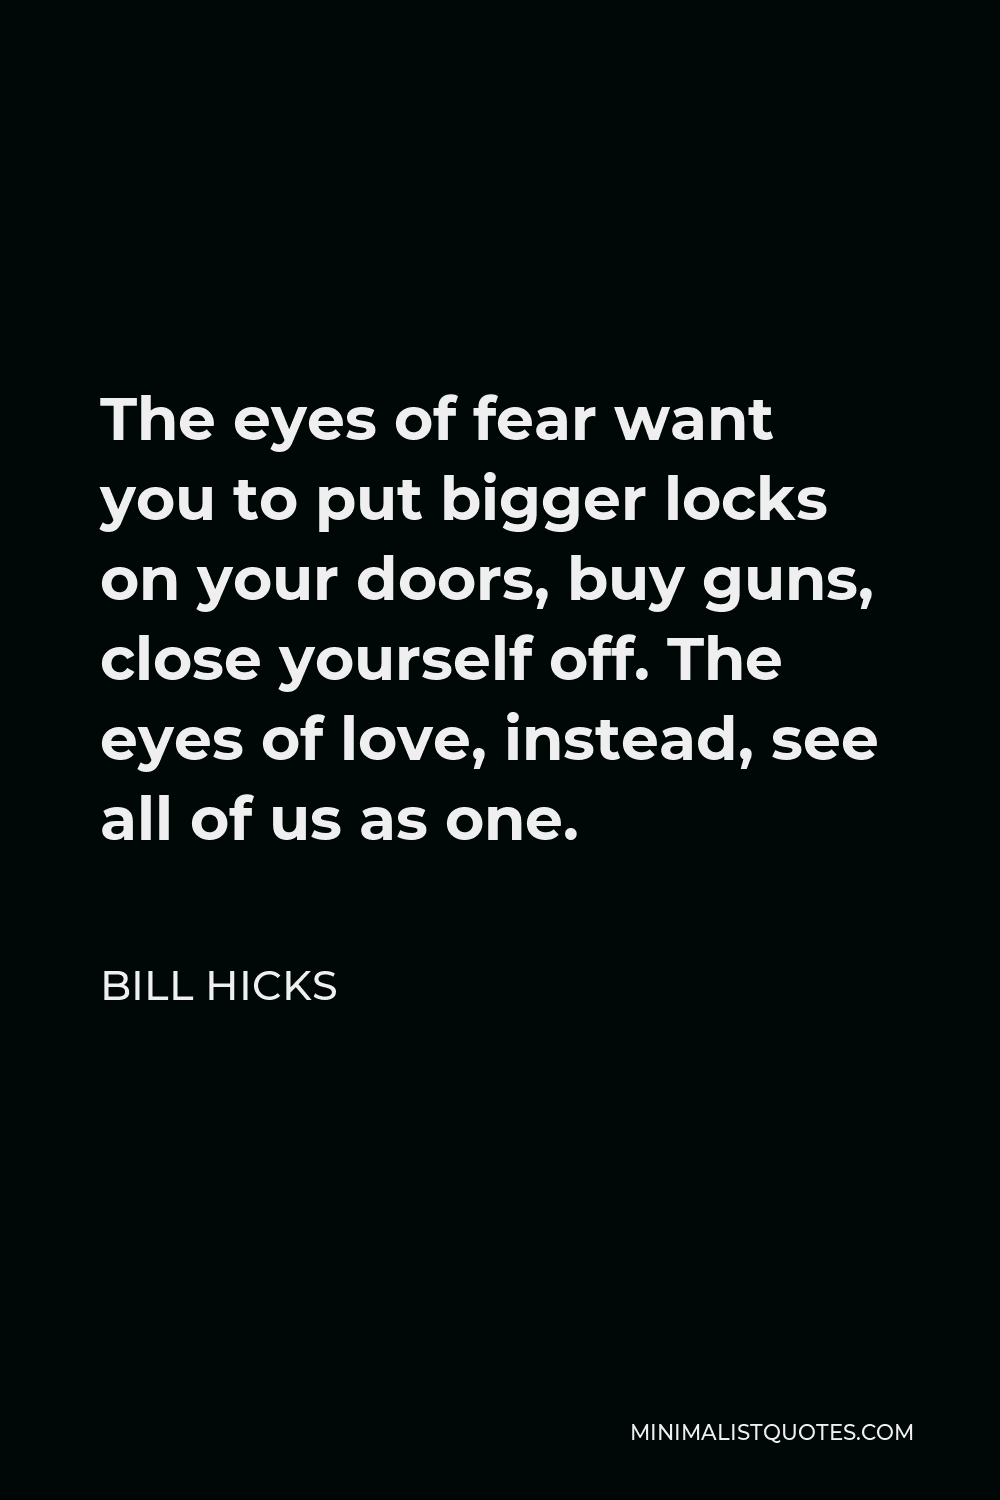 Bill Hicks Quote - The eyes of fear want you to put bigger locks on your doors, buy guns, close yourself off. The eyes of love, instead, see all of us as one.